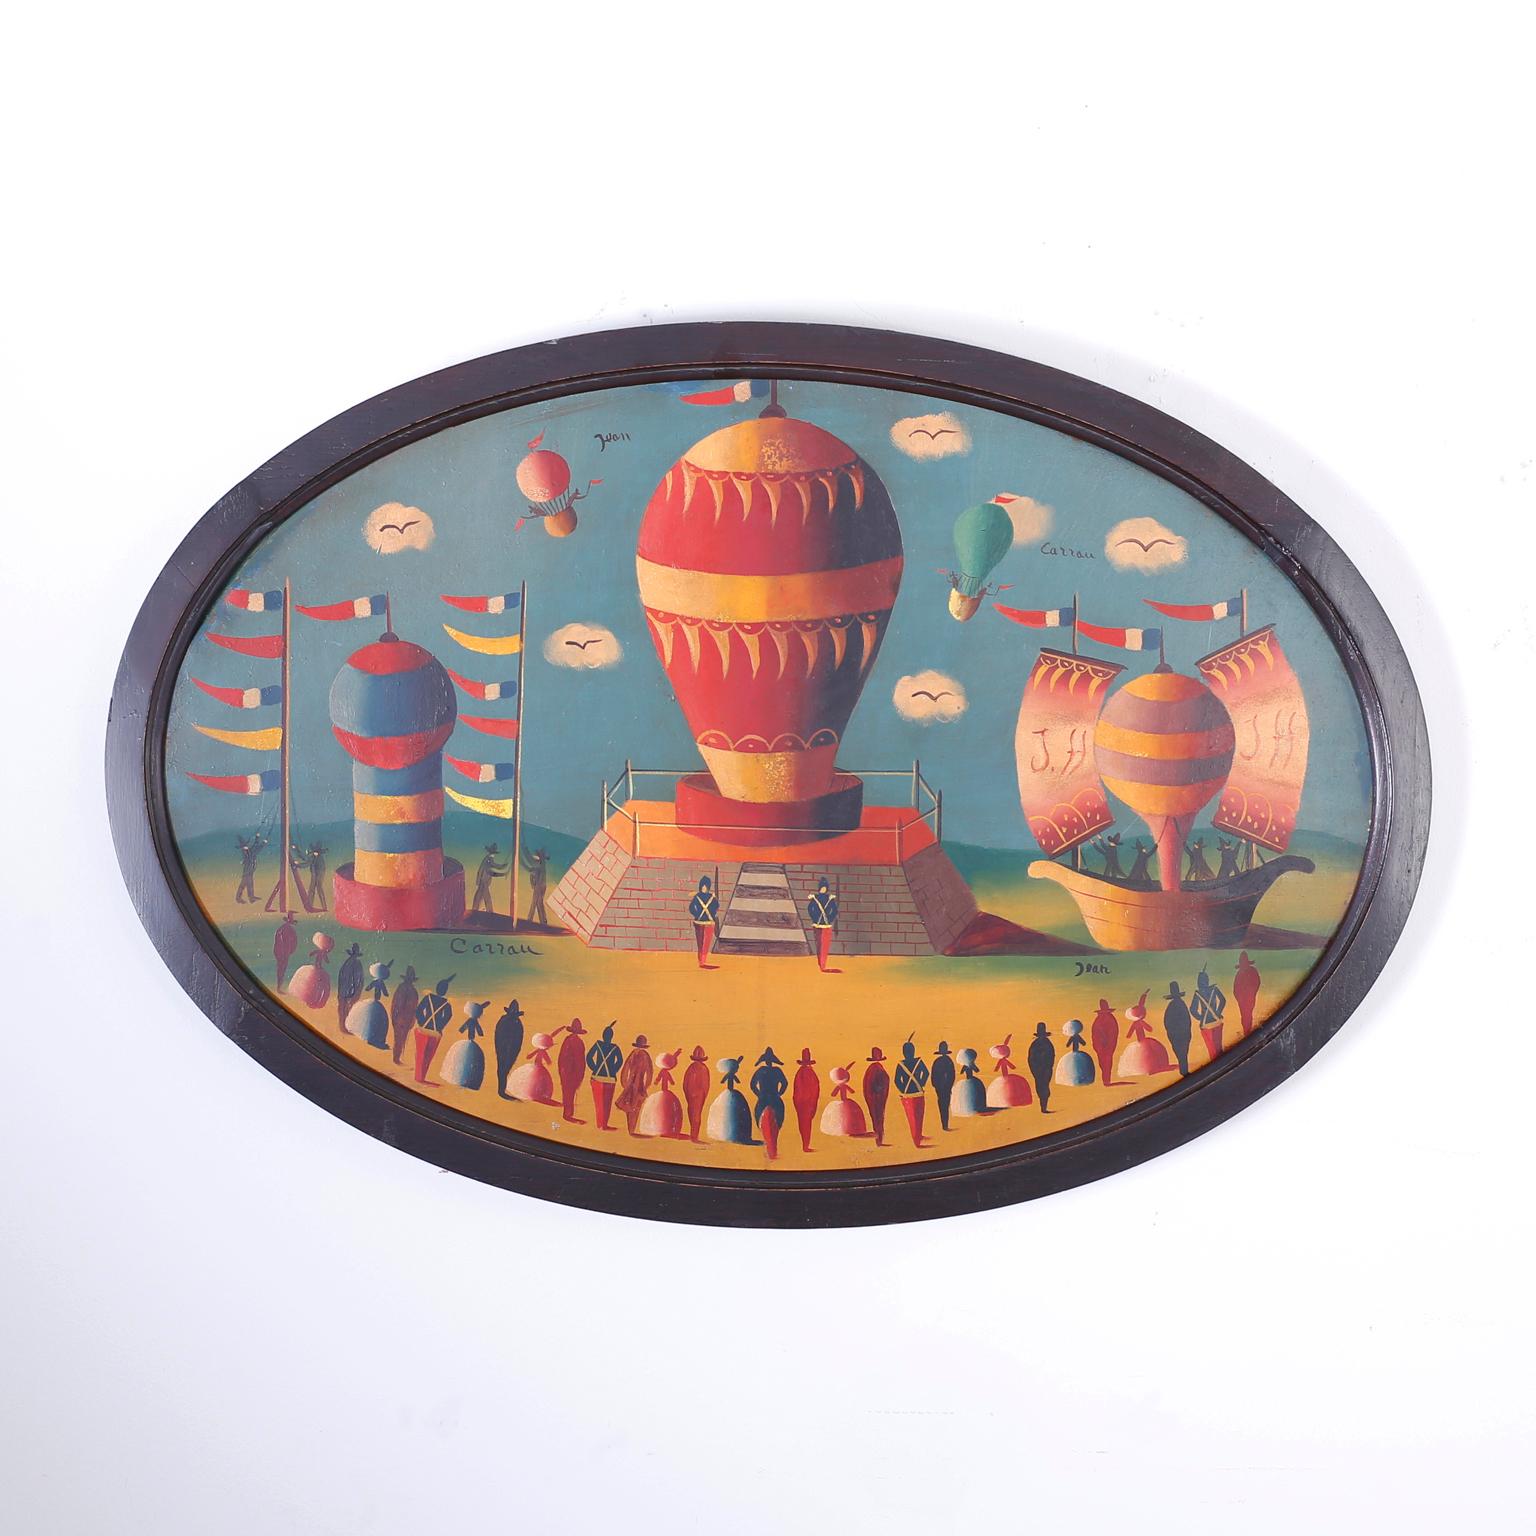 Three charming oval oil paintings on tin depicting festive balloon launch celebrations with pomp and circumstance. Presented in wood lacquered frames and signed Jean Carrau 1928. Priced individually. 

Large painting: H 21, W 31, D 1, $2950

Smaller